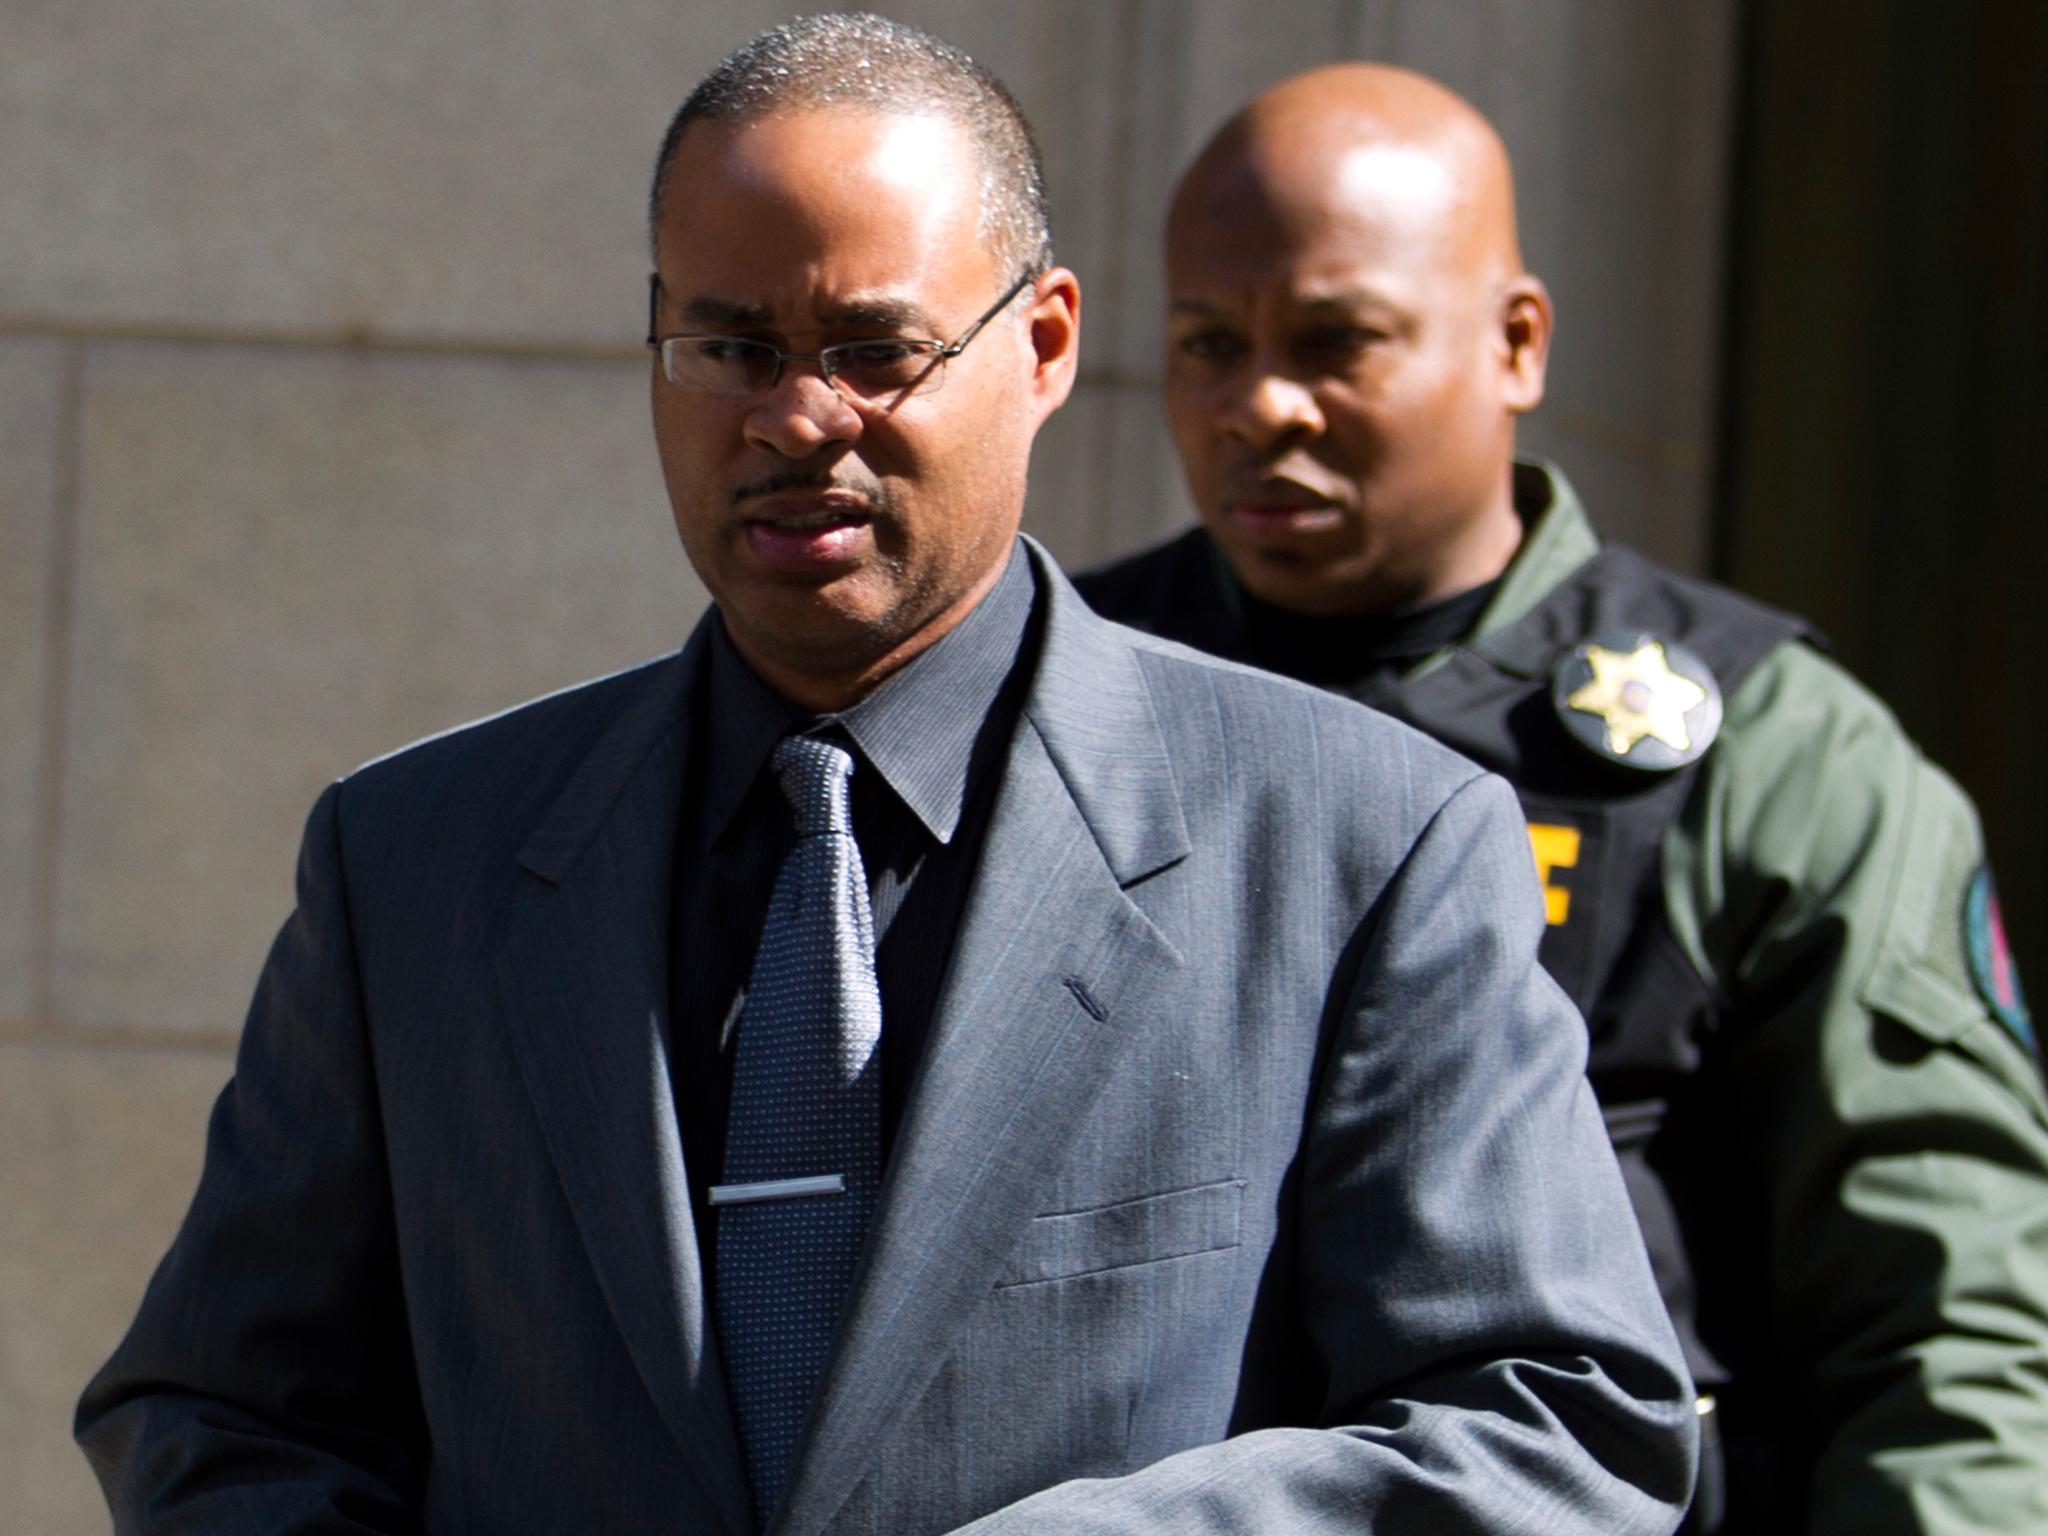 Goodson was acquitted of six charges related to the death of Freddie Gray AP